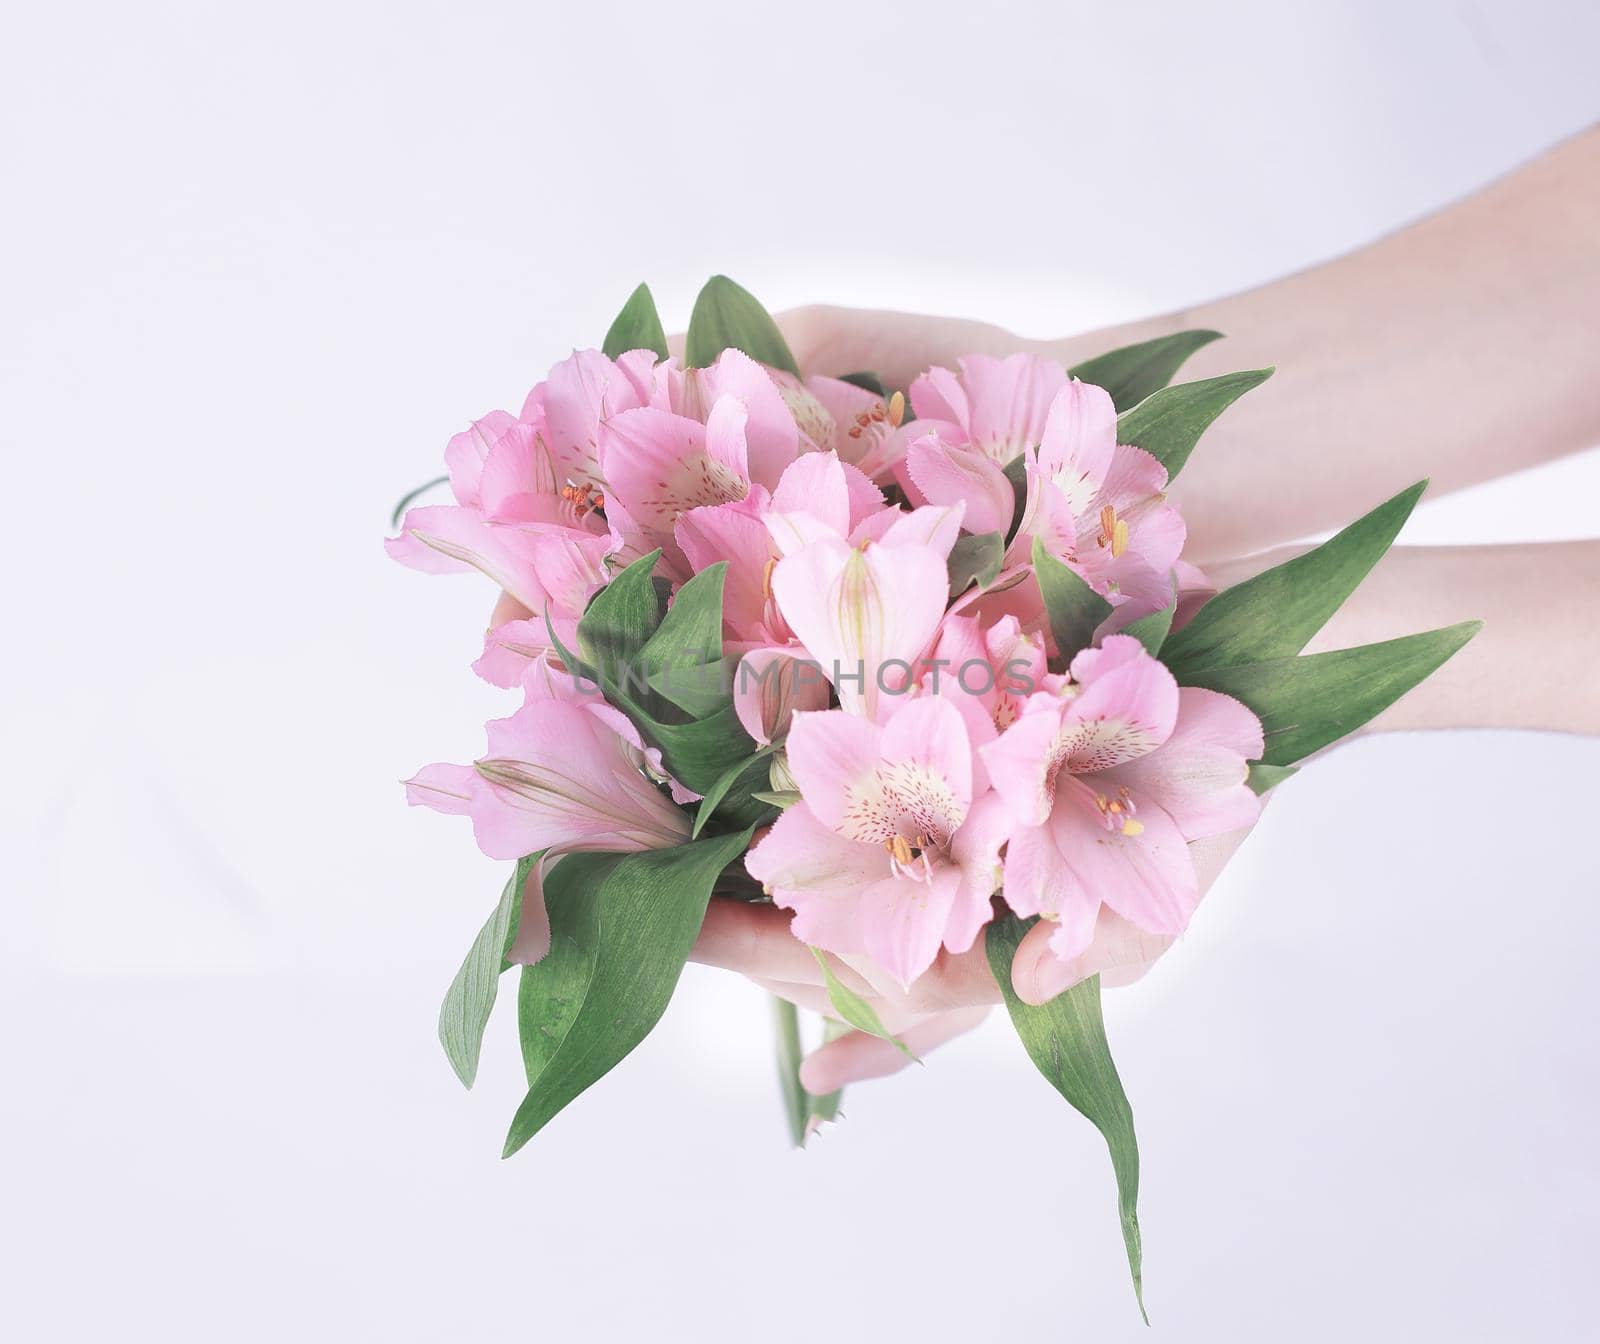 bouquet of flowers in female hands isolated on a light background.photo with copy space